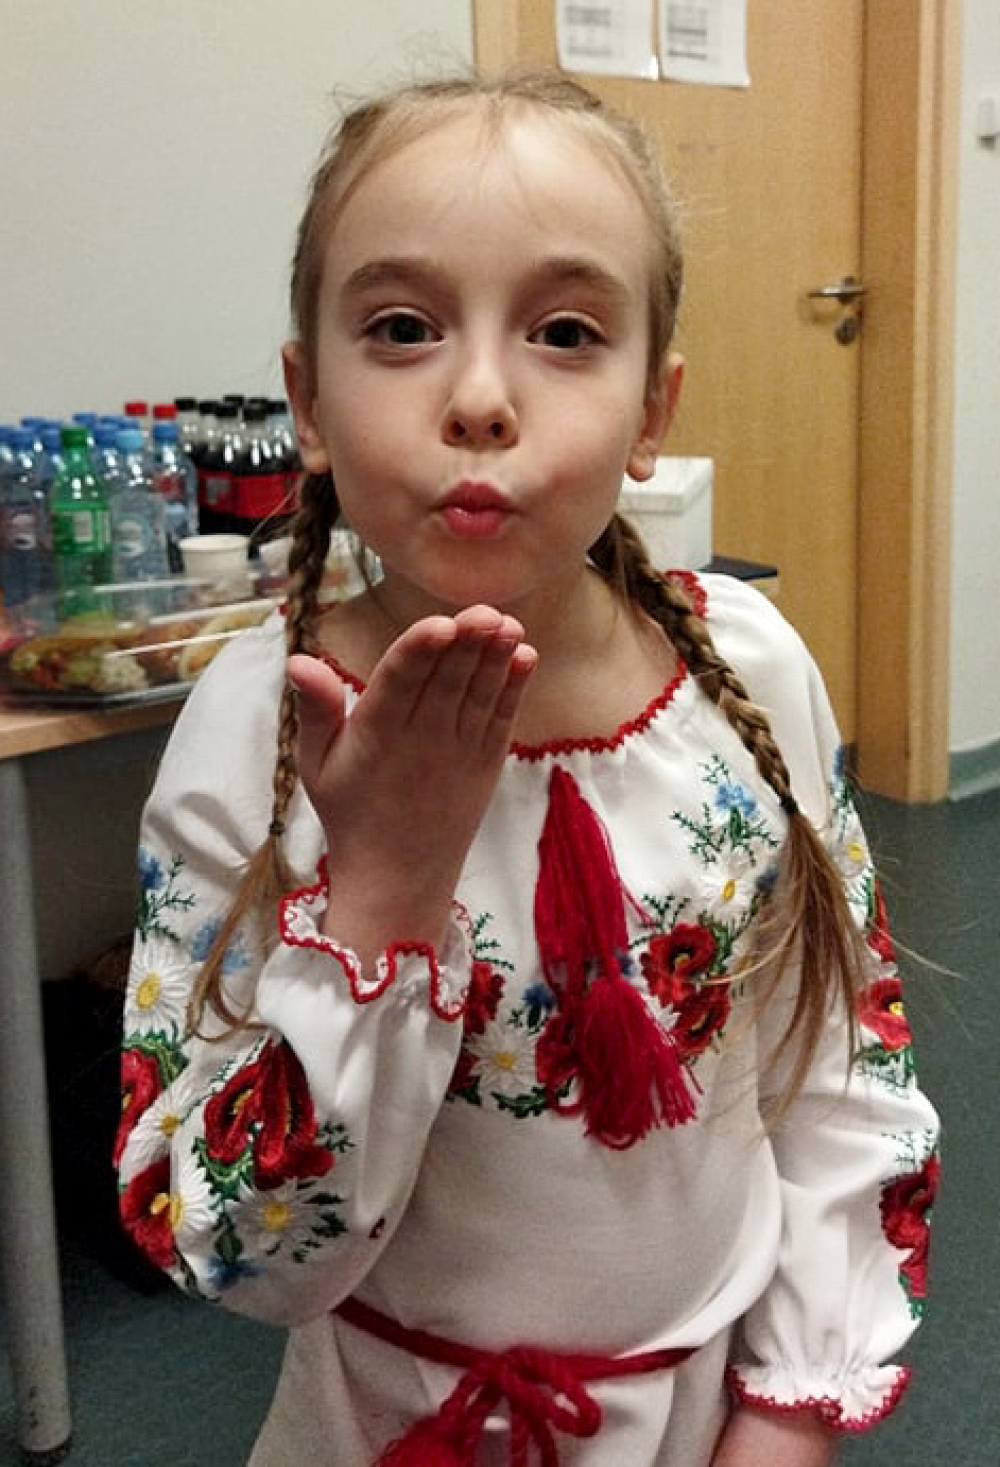 Ukrainian Girl 7 Sings Let It Go In Three Languages On Good Morning Britain The Independent